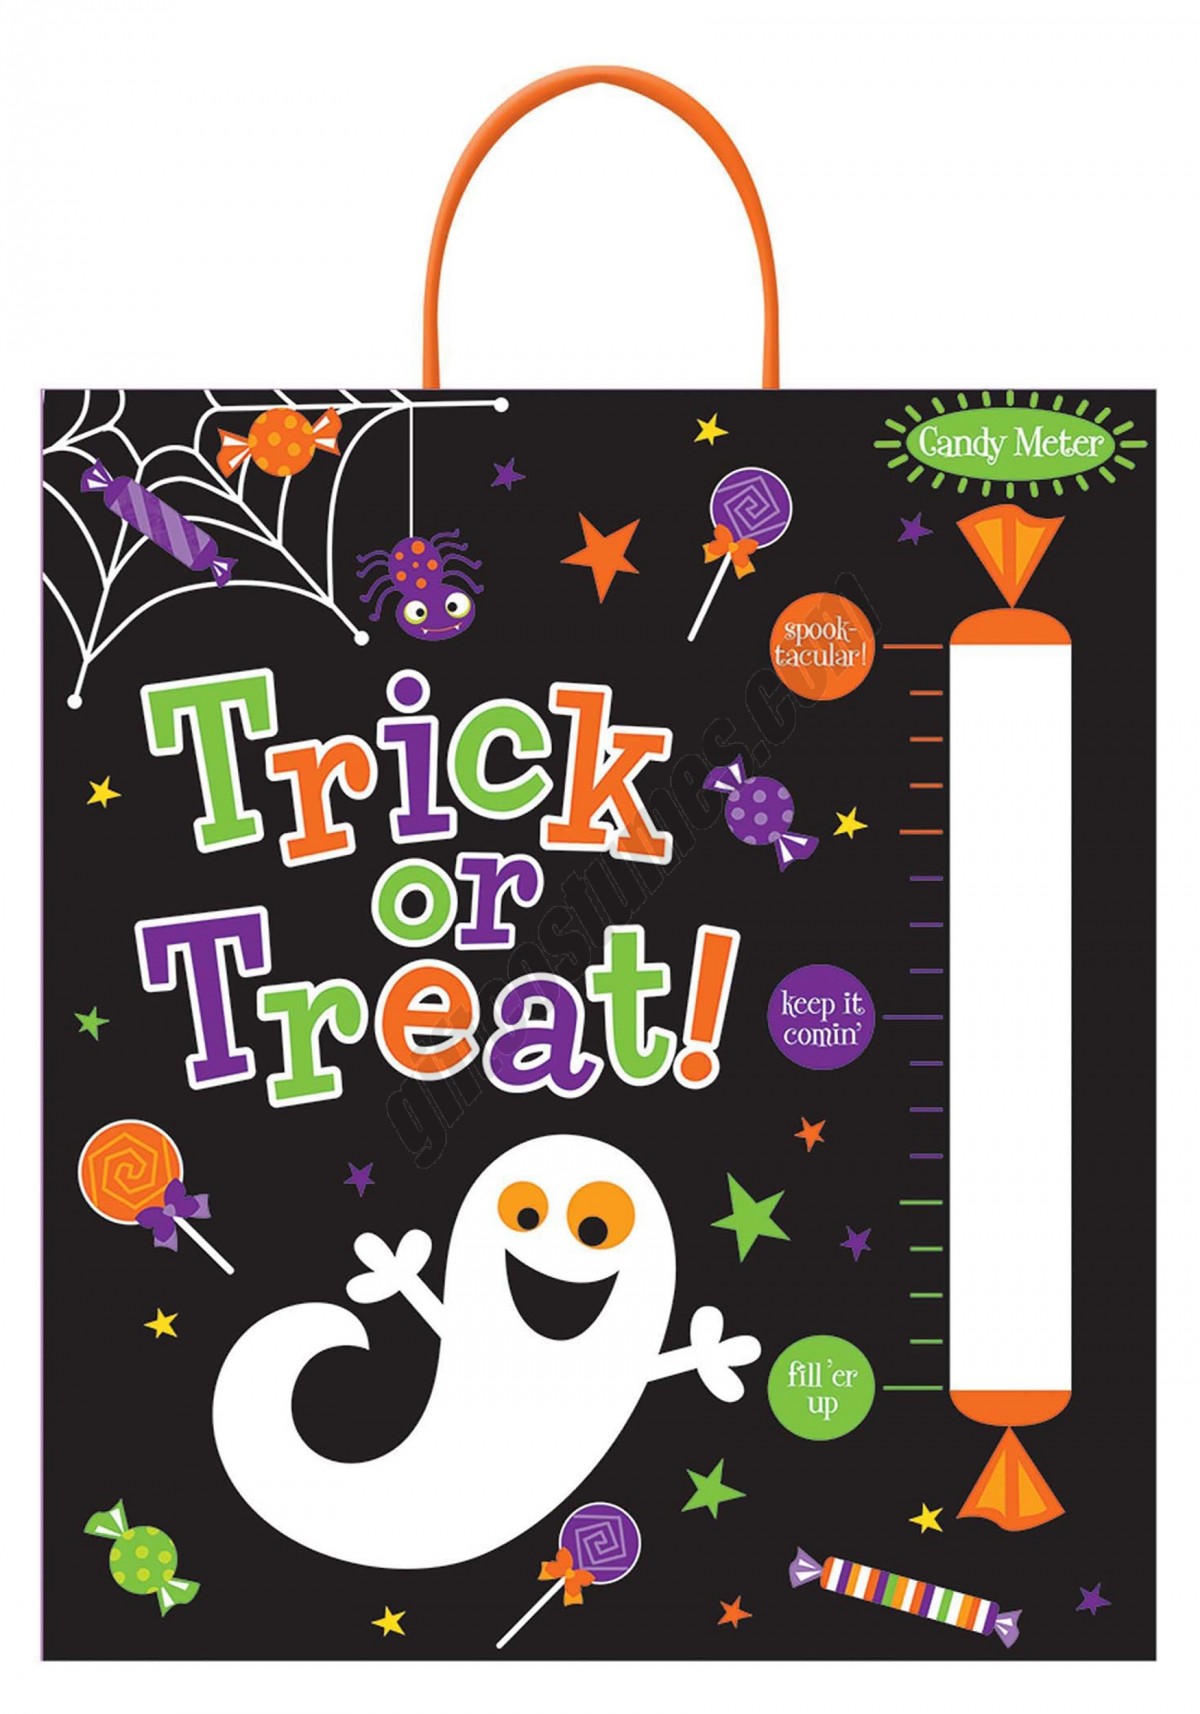 Treat Candy Meter Bag Promotions - -0